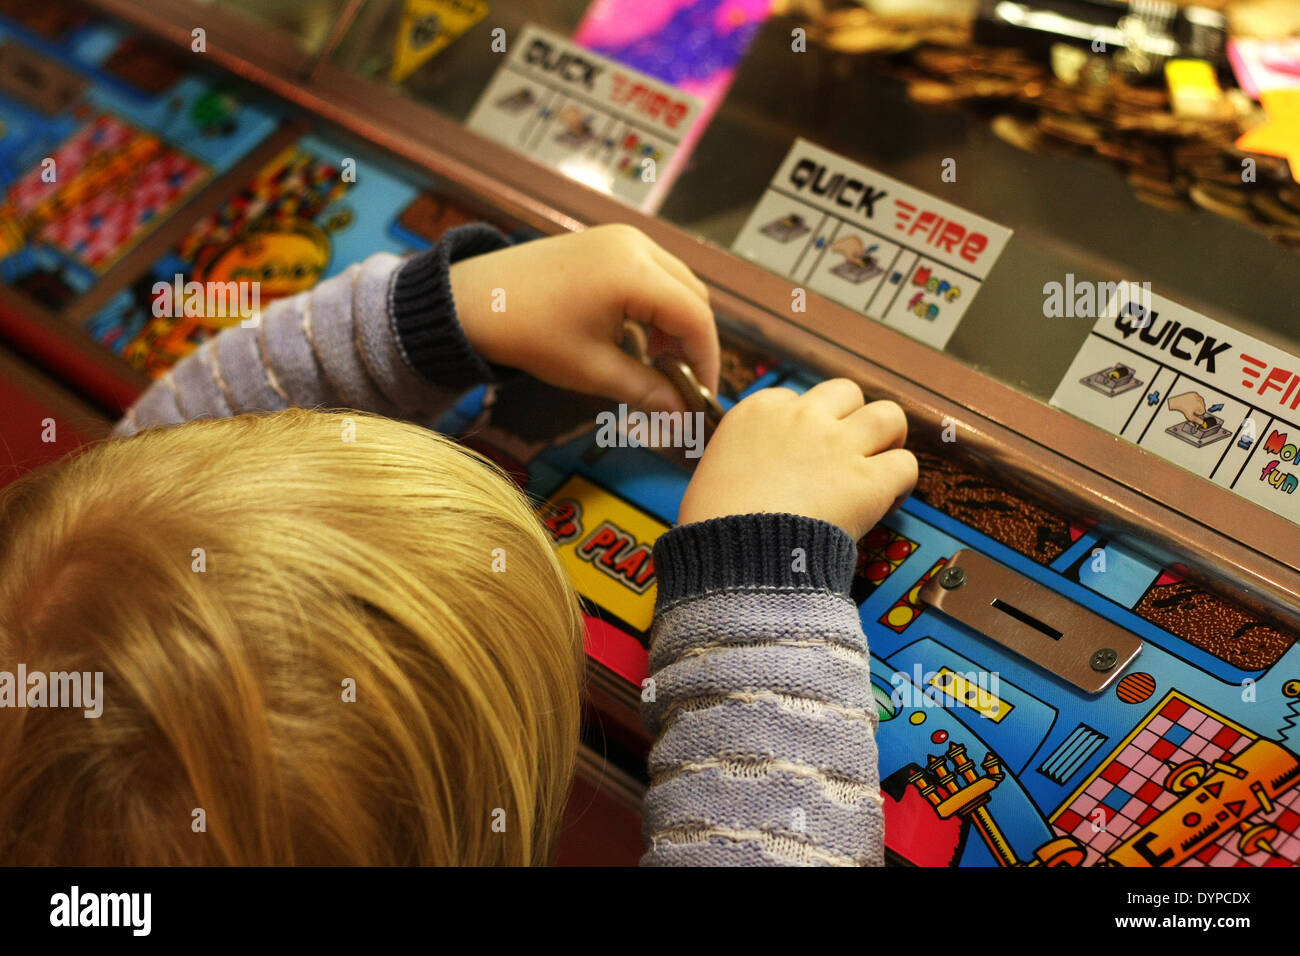 Putting two pence coins in slot machine. Stock Photo